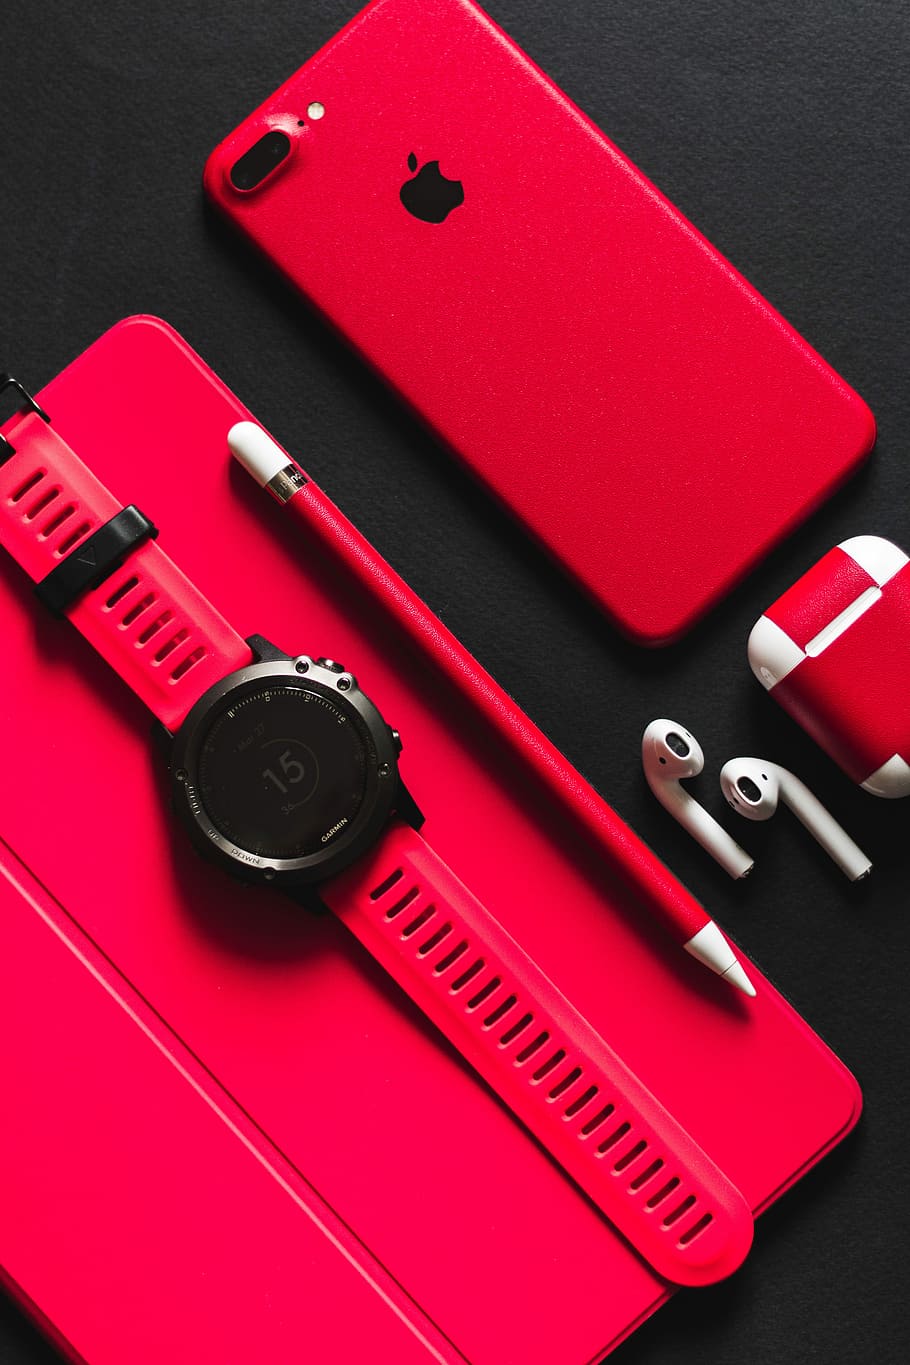 Smartwatch, Stylus, Airpods, And Product Red Iphone - Iphone Xr Red And Airpods - HD Wallpaper 